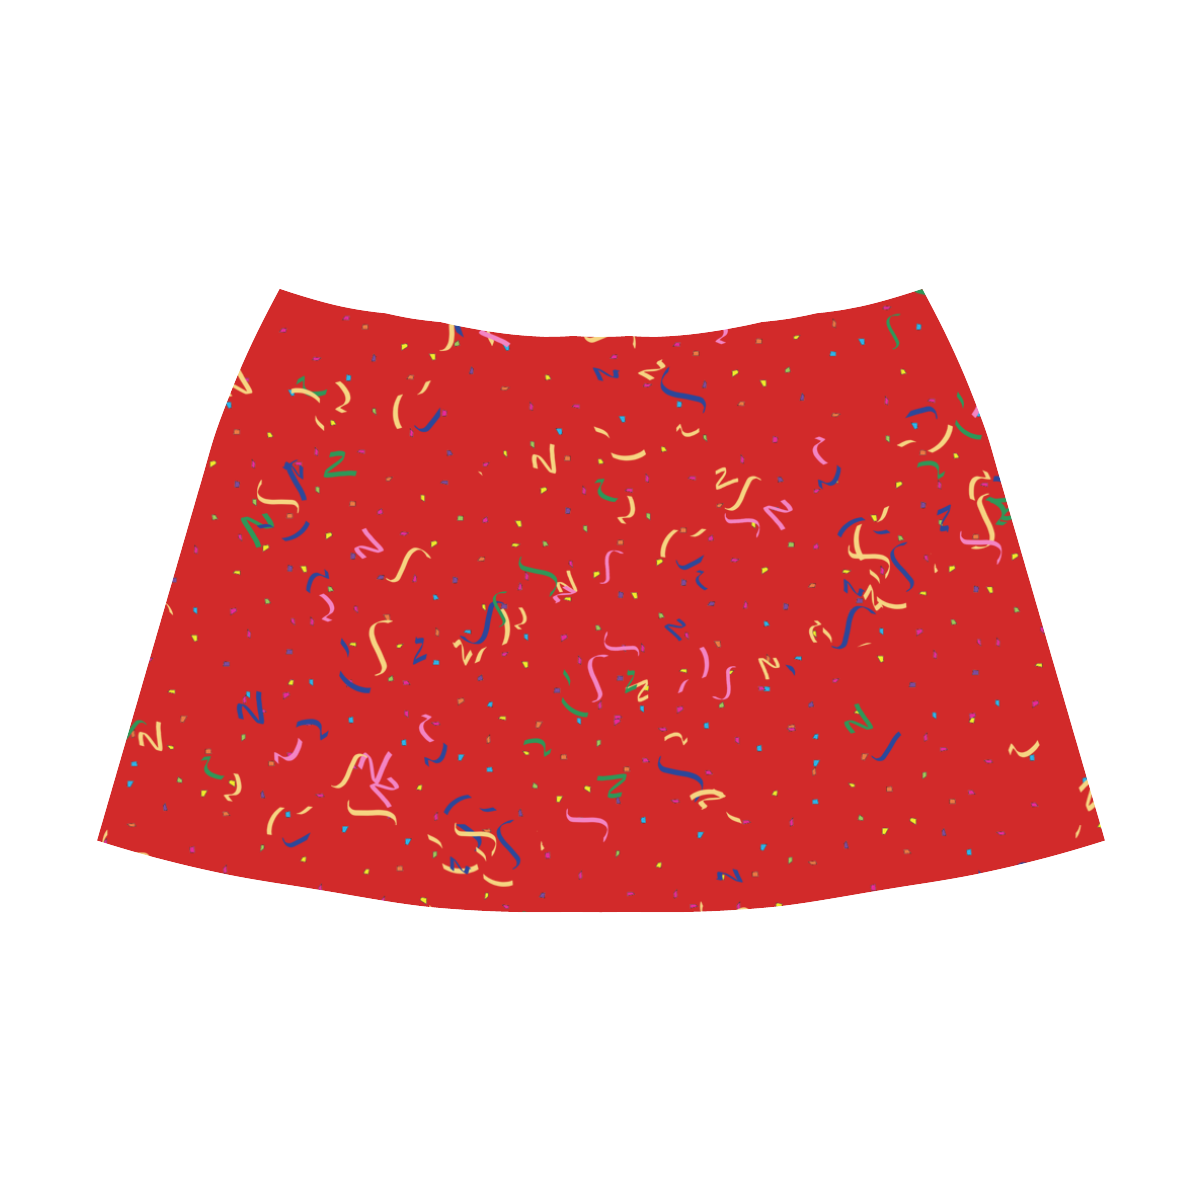 Confetti and  Party Streamers on Red Mnemosyne Women's Crepe Skirt (Model D16)